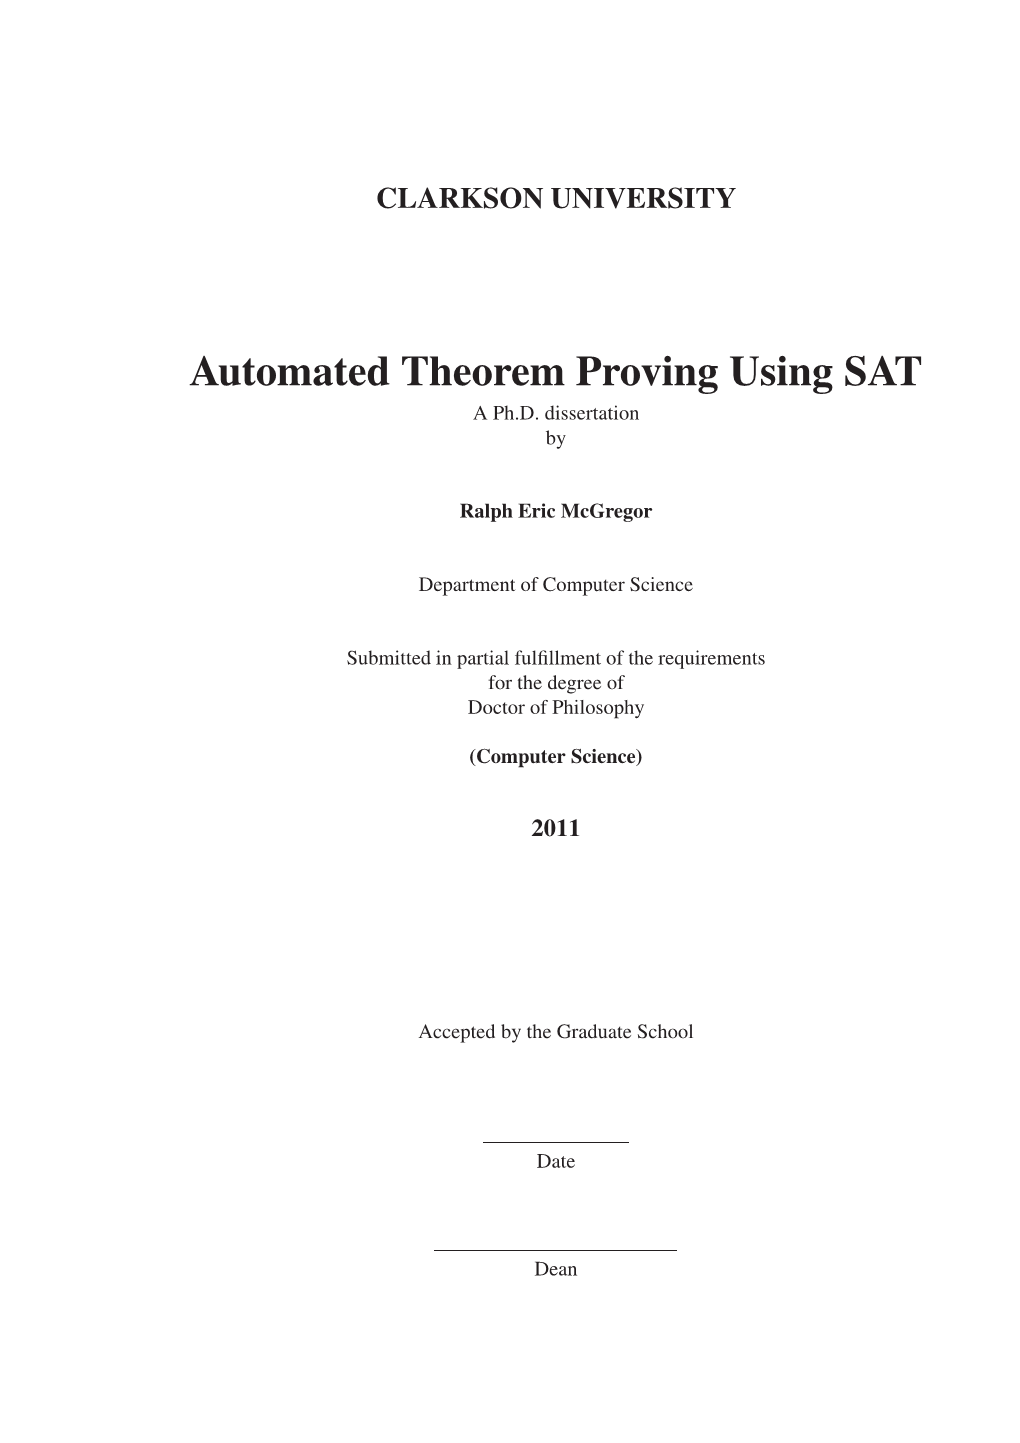 Automated Theorem Proving Using SAT a Ph.D